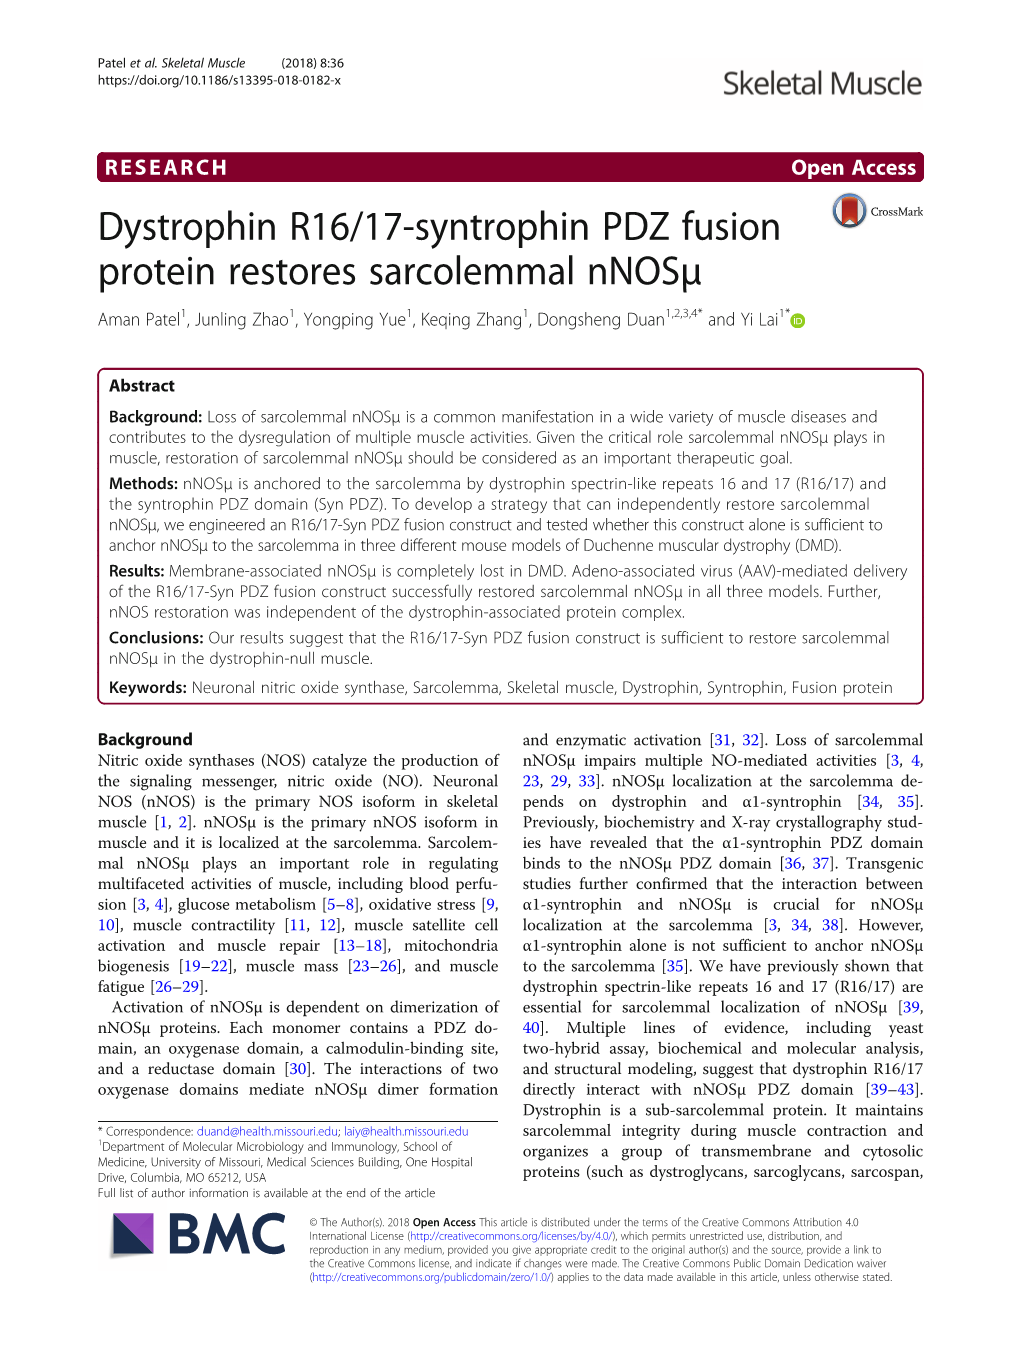 Dystrophin R16/17-Syntrophin PDZ Fusion Protein Restores Sarcolemmal